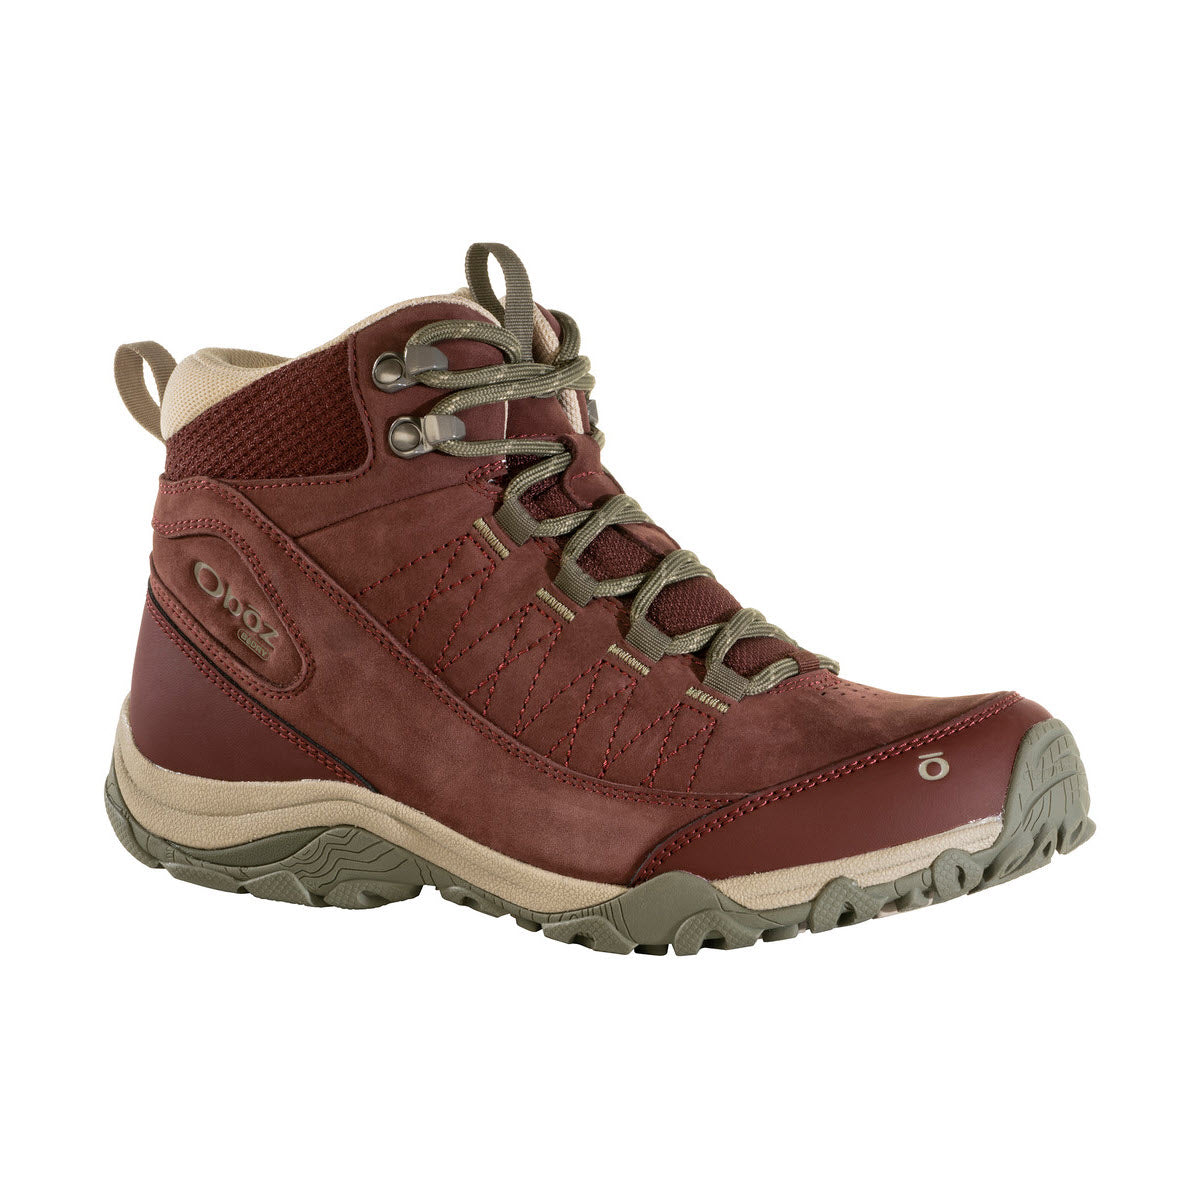 Red waterproof Oboz Ousel Mid hiking boot with gray accents, featuring lace-up closures and a high ankle design, displayed against a white background.